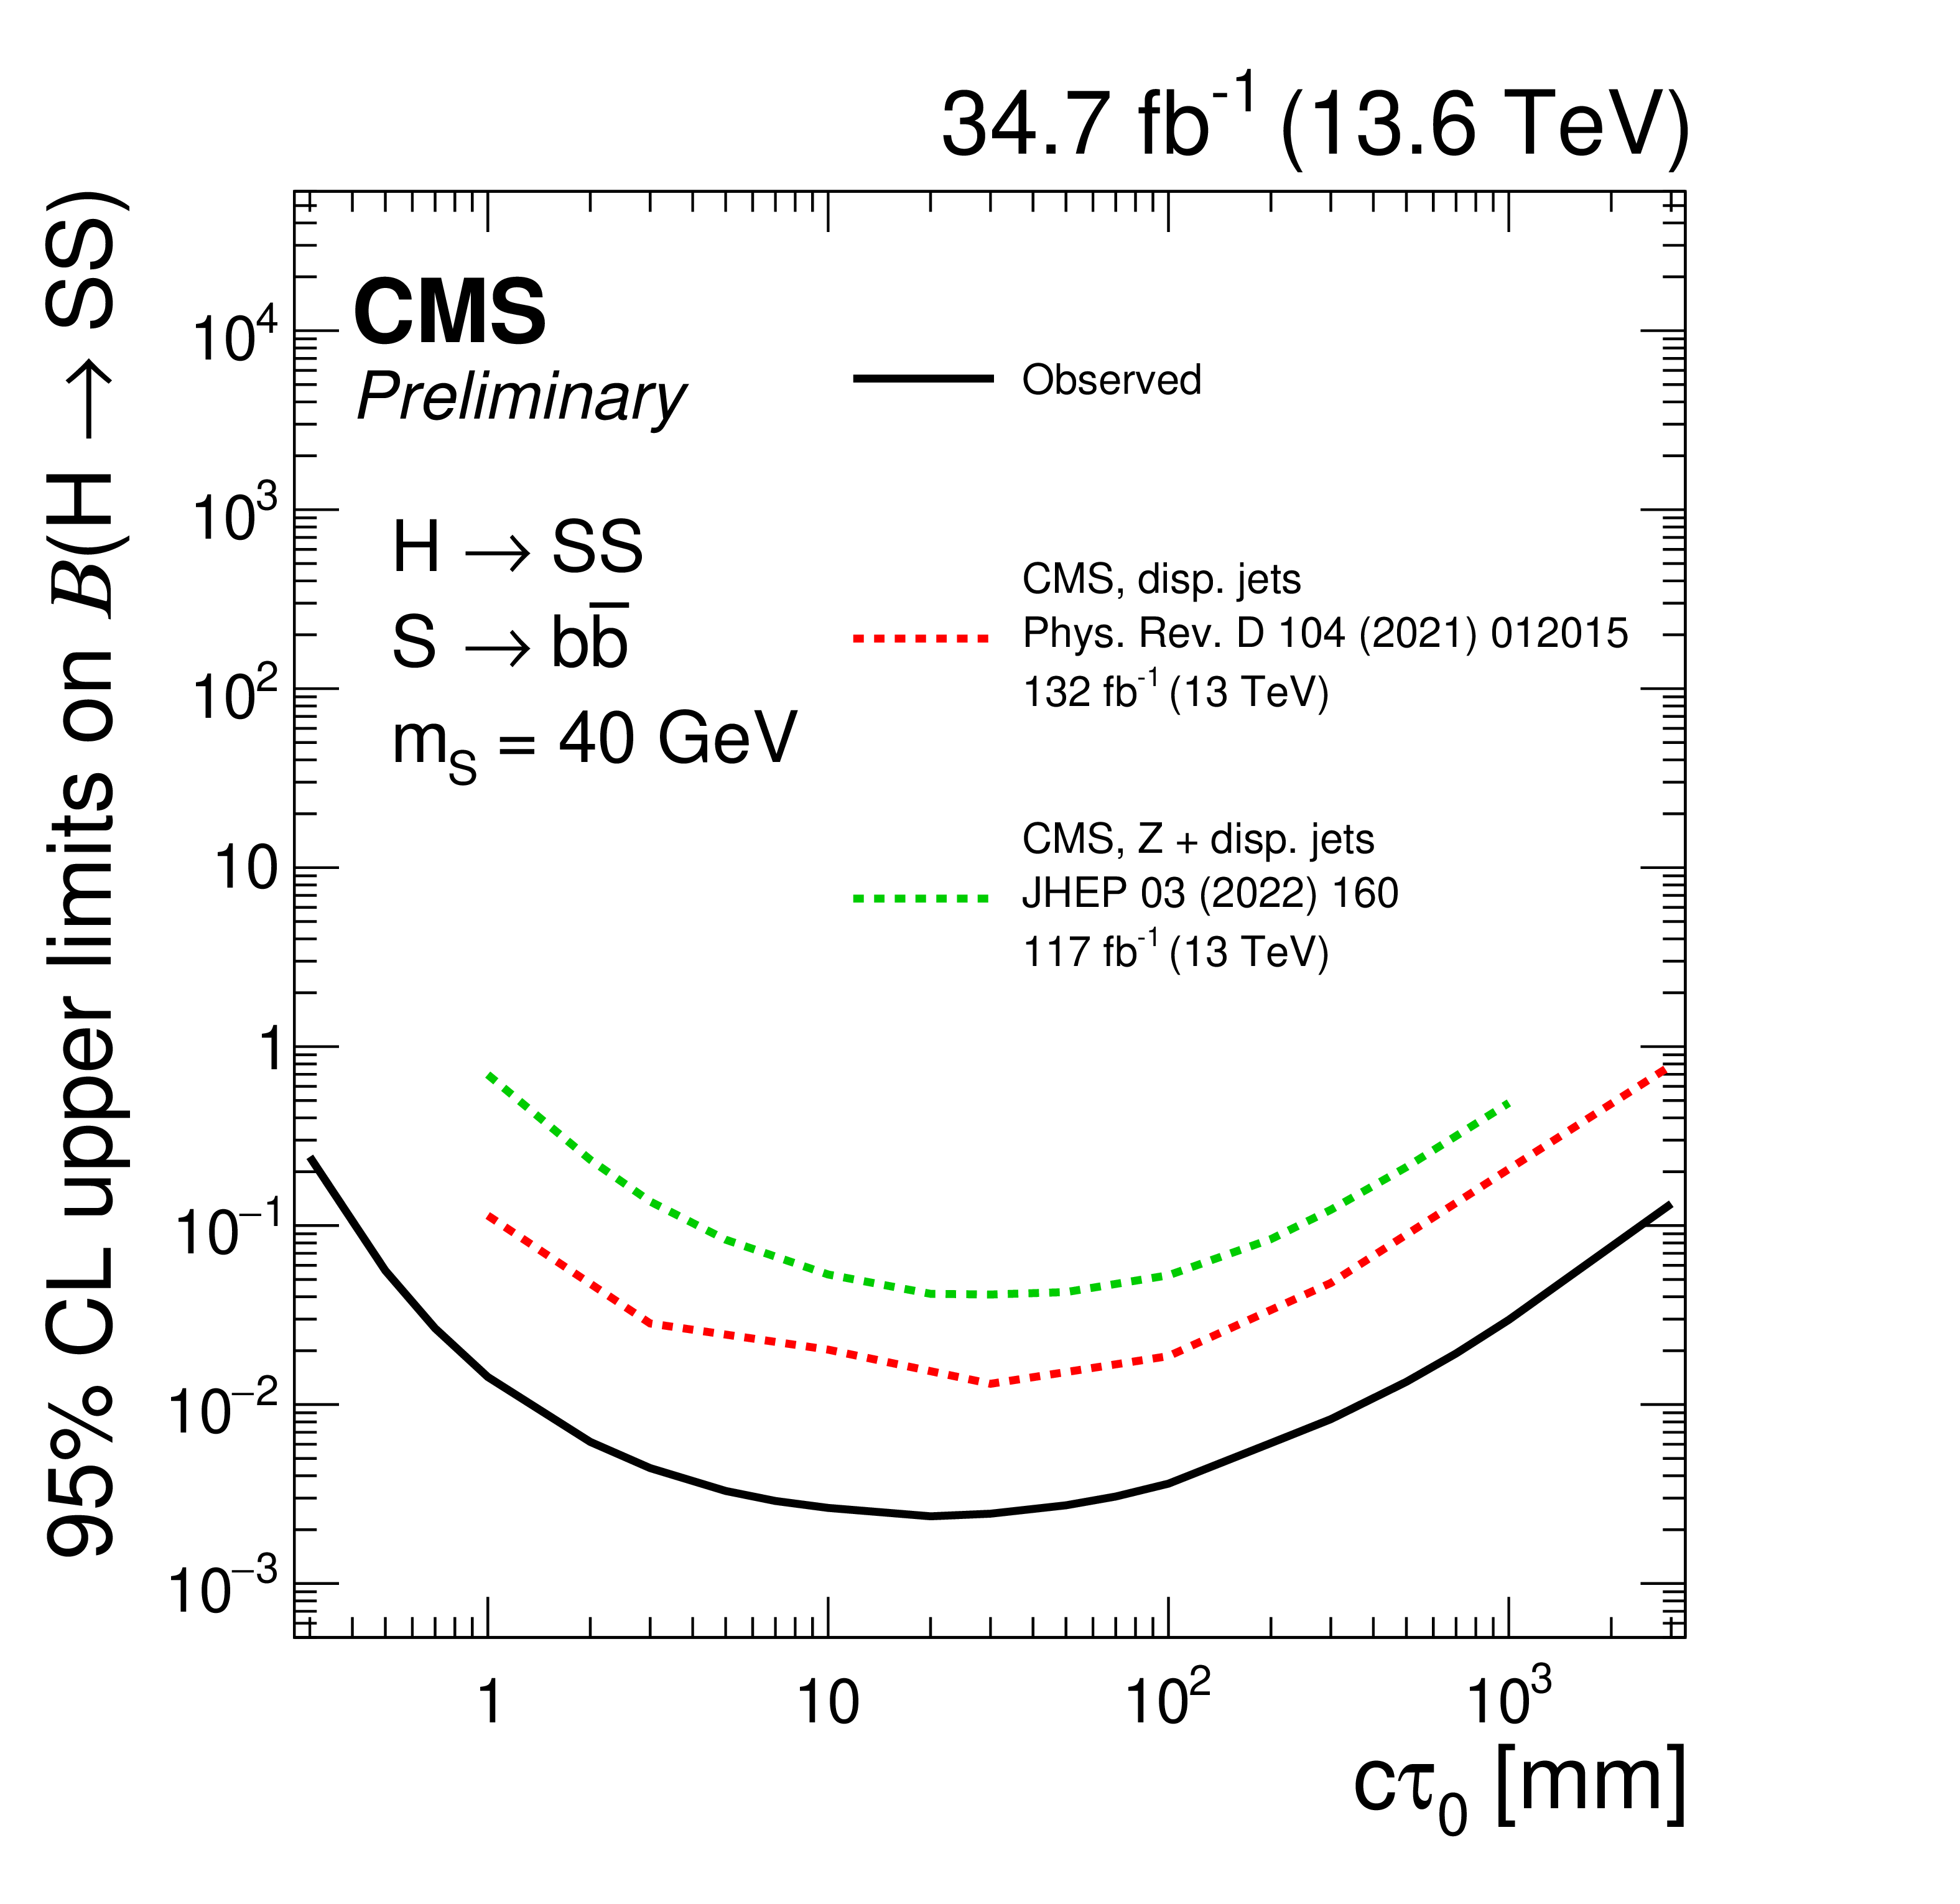 https://cms-results.web.cern.ch/cms-results/public-results/preliminary-results/EXO-23-013/CMS-PAS-EXO-23-013_Figure_004-a.png